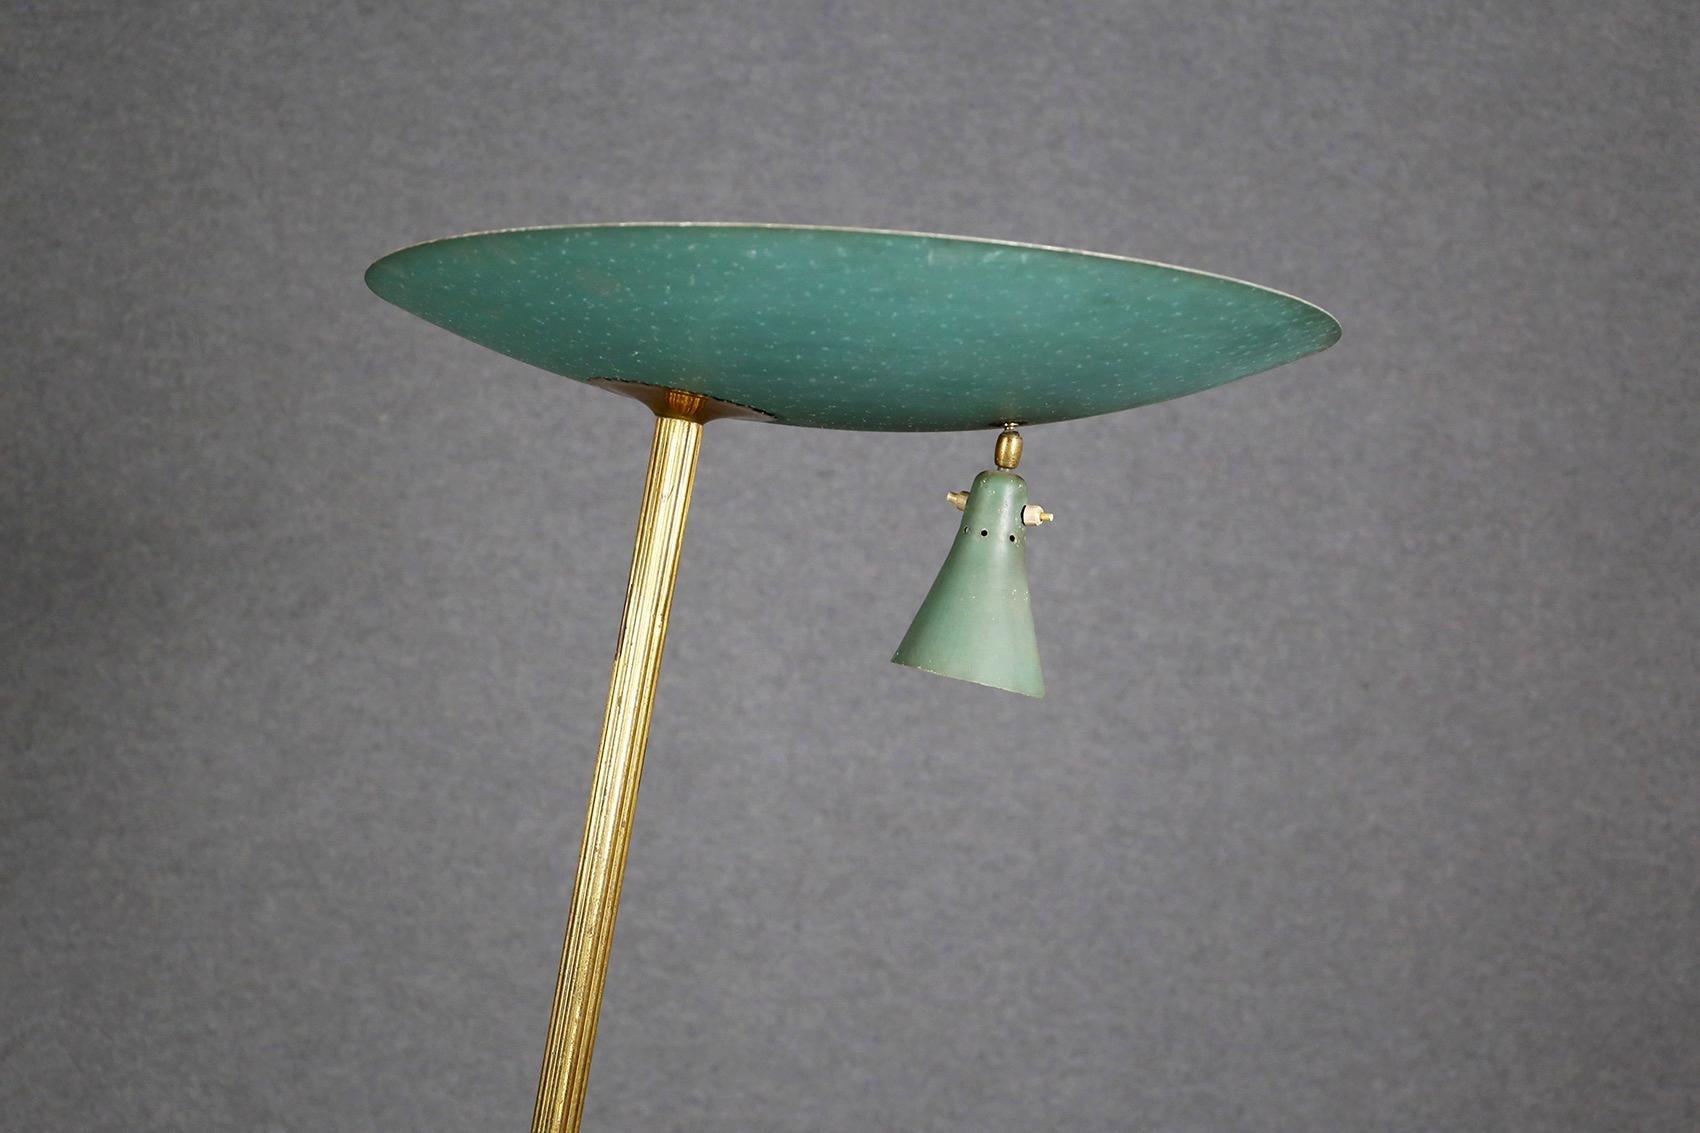 Pure Italian design. Floor lamp attributed to Studio BBPR of the 1930s and 1940s. The lamp has as base two iron tips in the shape of forked. The stem is made of tubular brass and its semi-circular hat is made of green iron. From the hat you can see